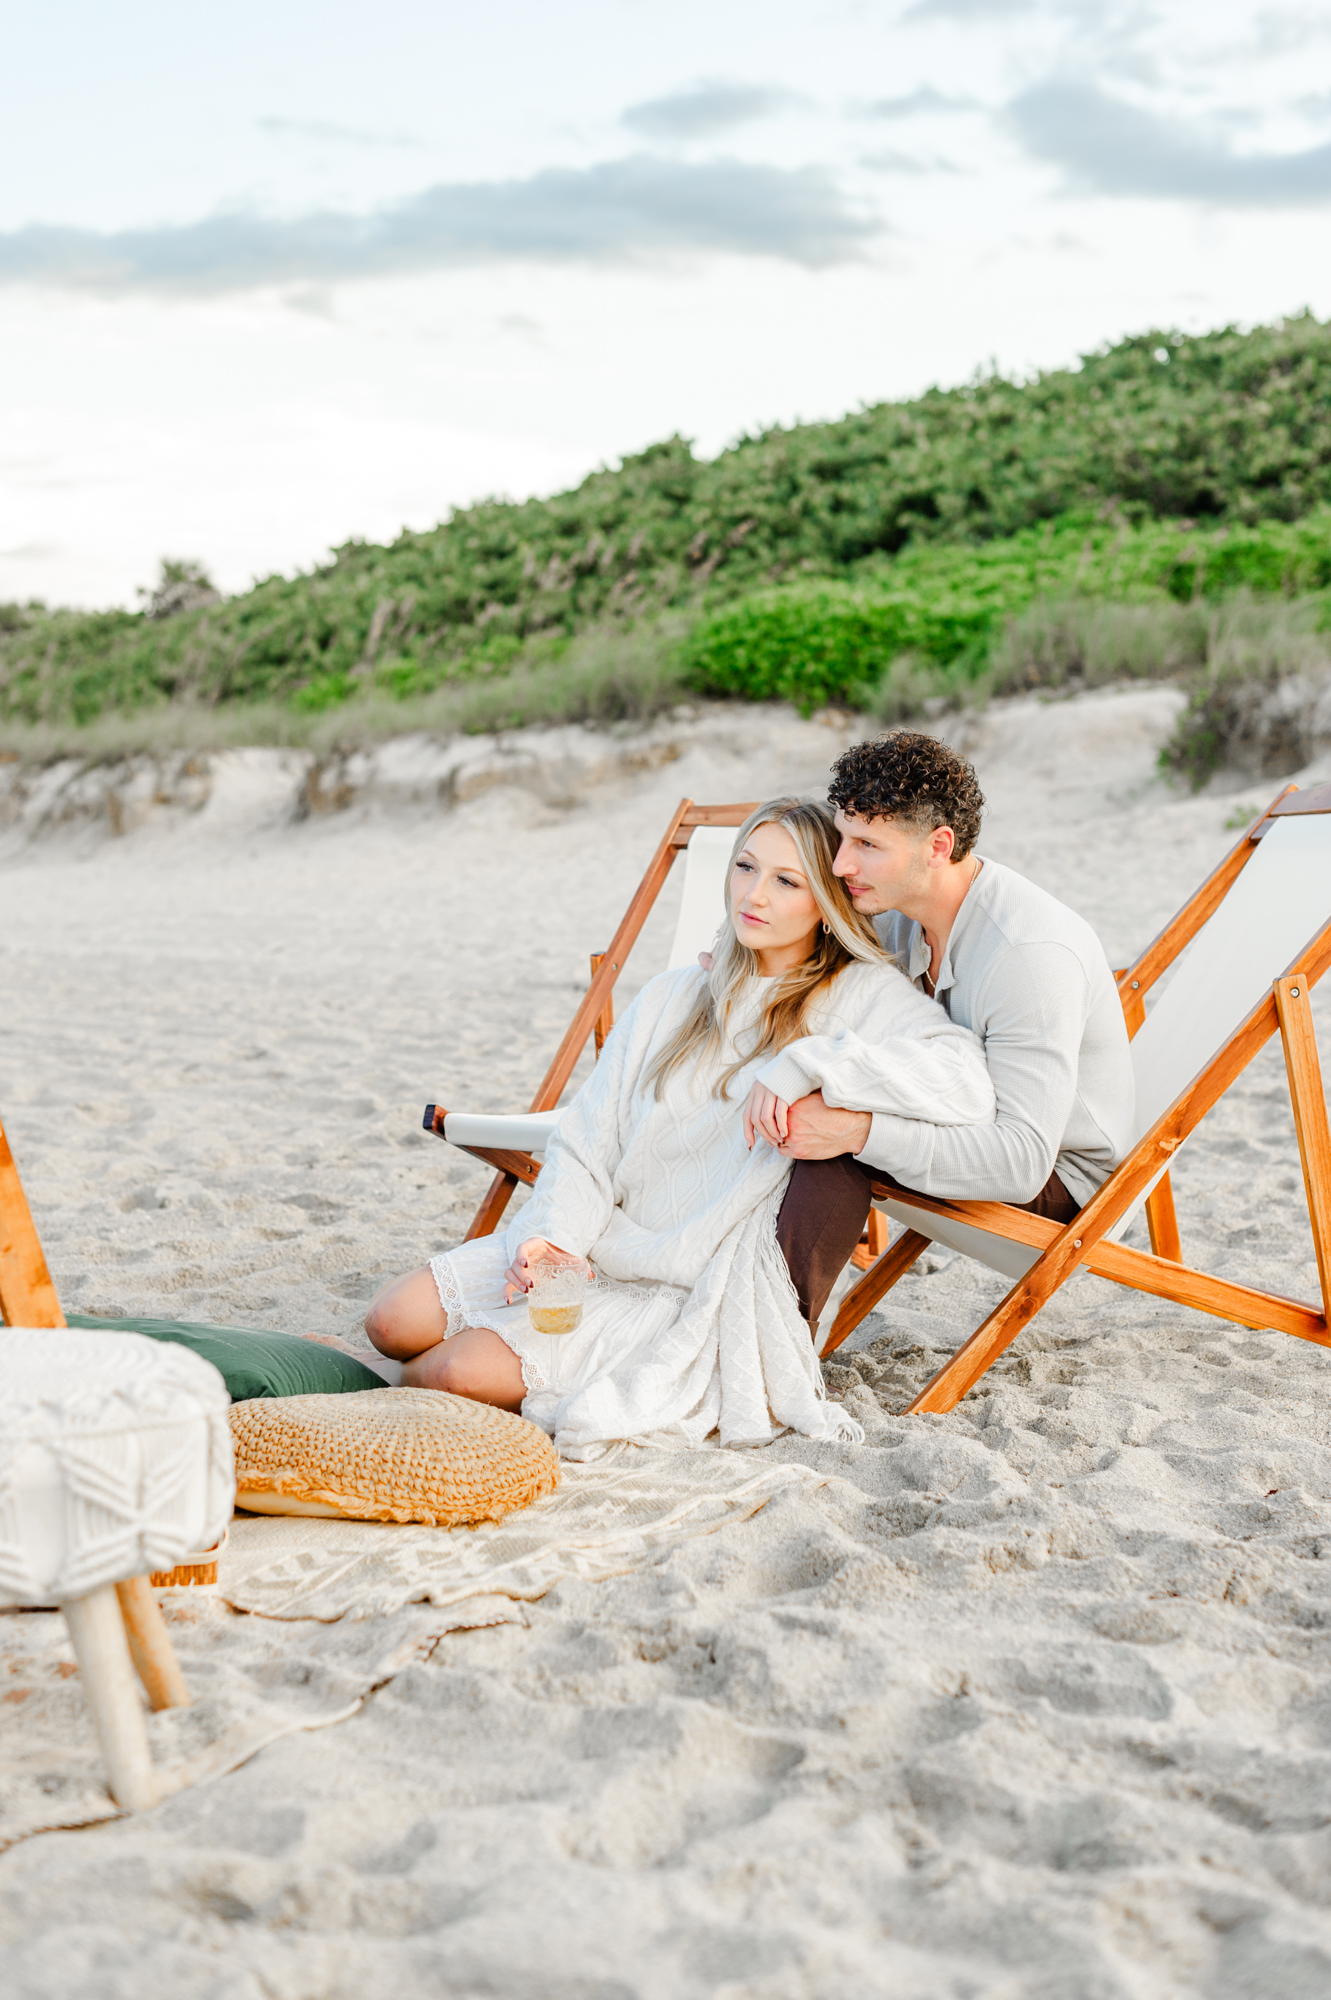 Stunning couple enjoys a beautiful luxury picnic on the beach for a fall date night.